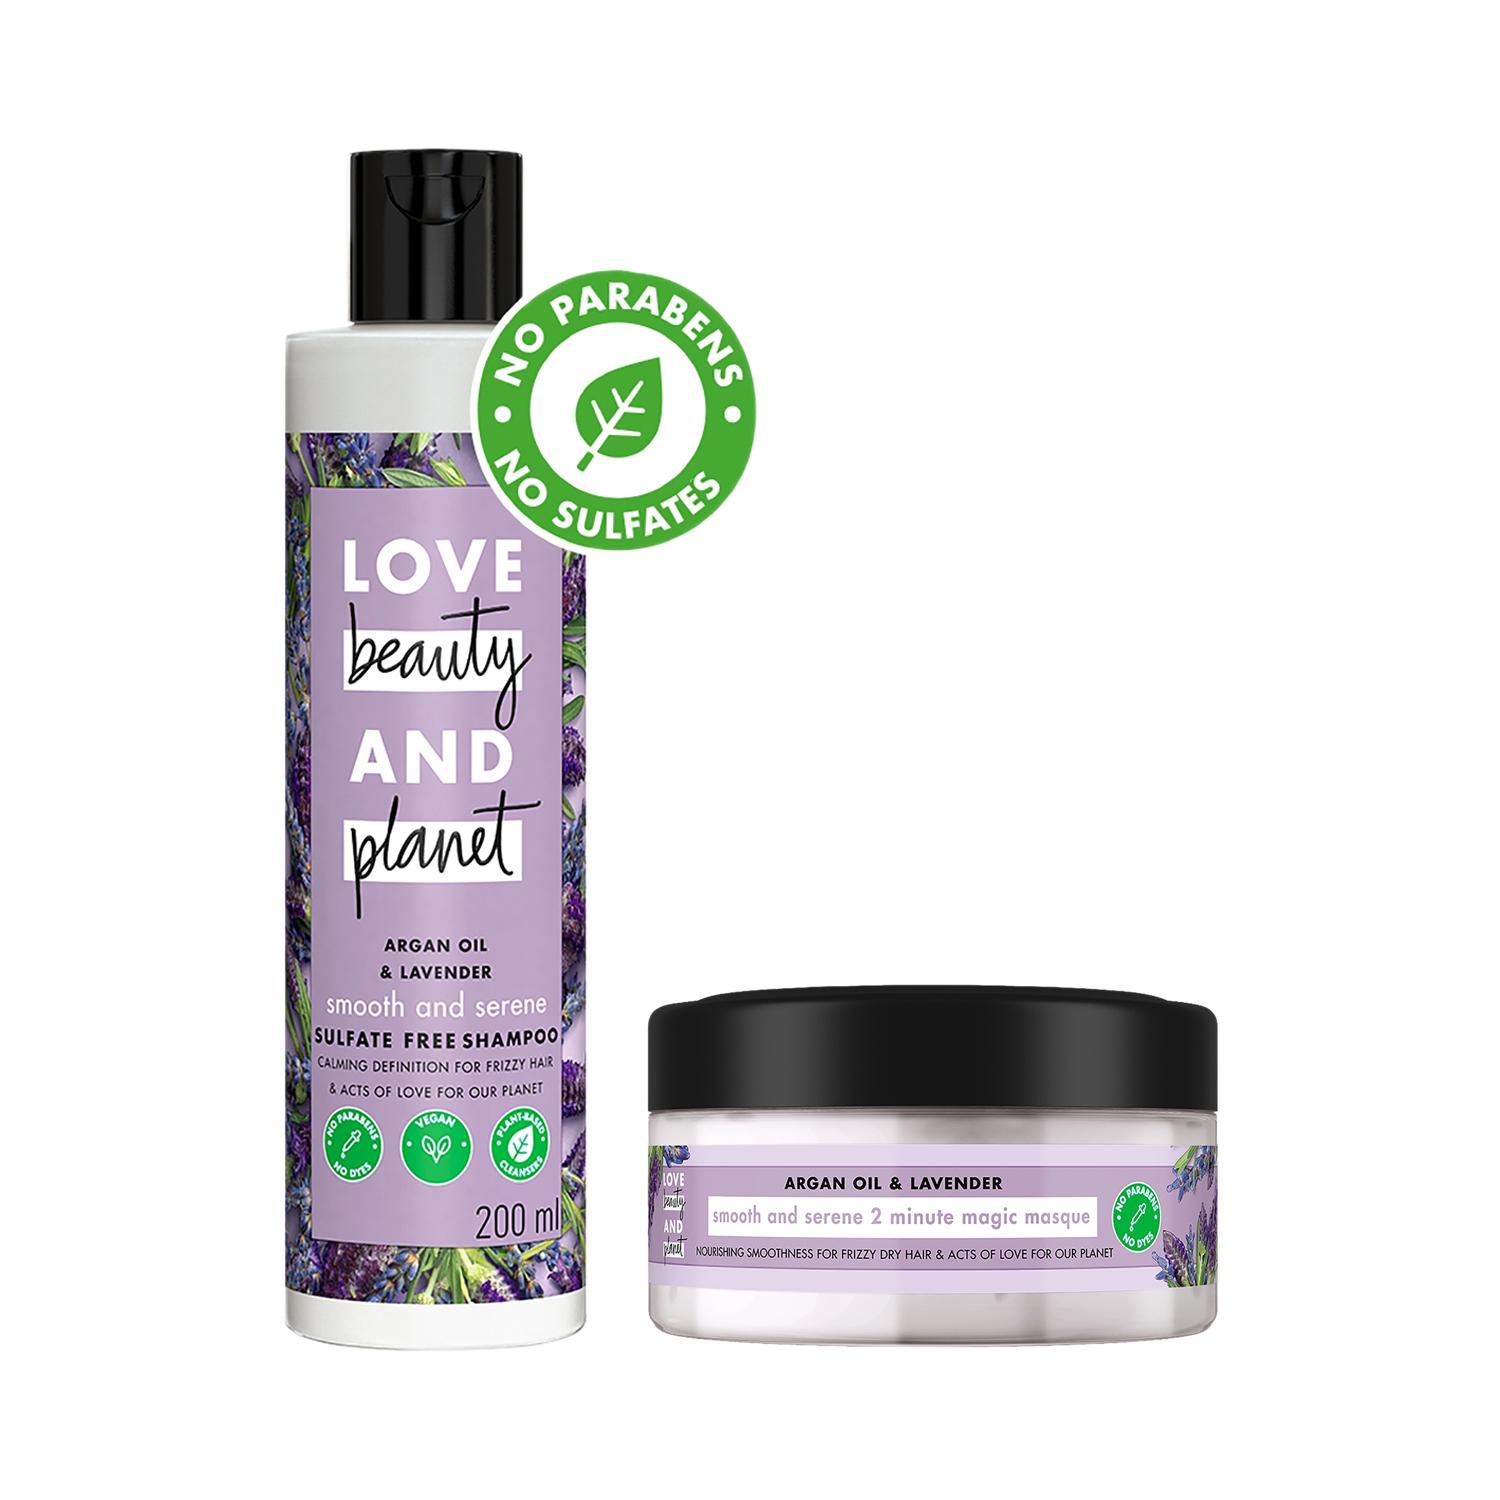 Love Beauty & Planet | Love Beauty & Planet Argan Oil And Lavender Sulfate Free Smooth And Serene Shampoo & Hair Mask Combo